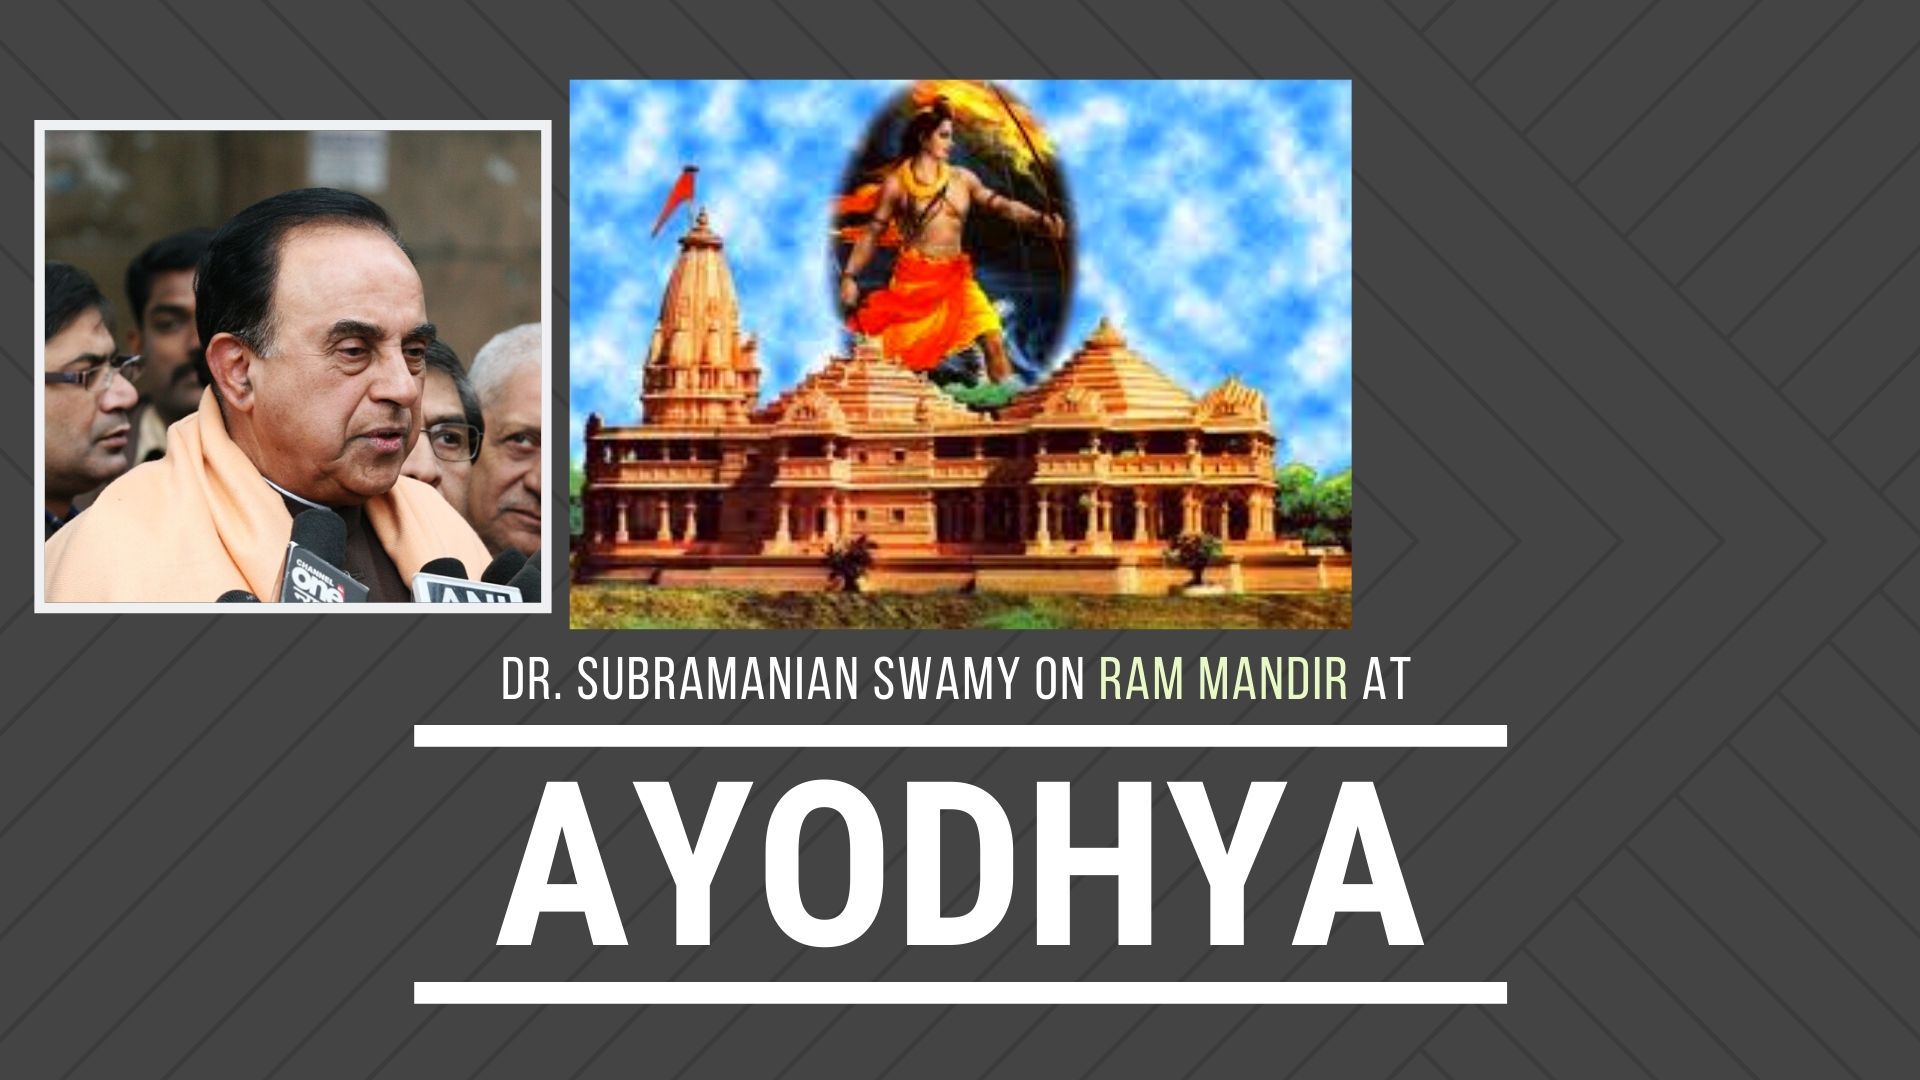 A rousing speech in Hindi by Dr. Subramanian Swamy on Rashtrapurush Ramachandra-ji. One of the most eloquent speeches on the Maryada Purushottam Sri Ramachandra. A must watch for one and all as Dr. Swamy draws comparisons between Ram and Krishna and why Rama is called Maryada Purushottam.